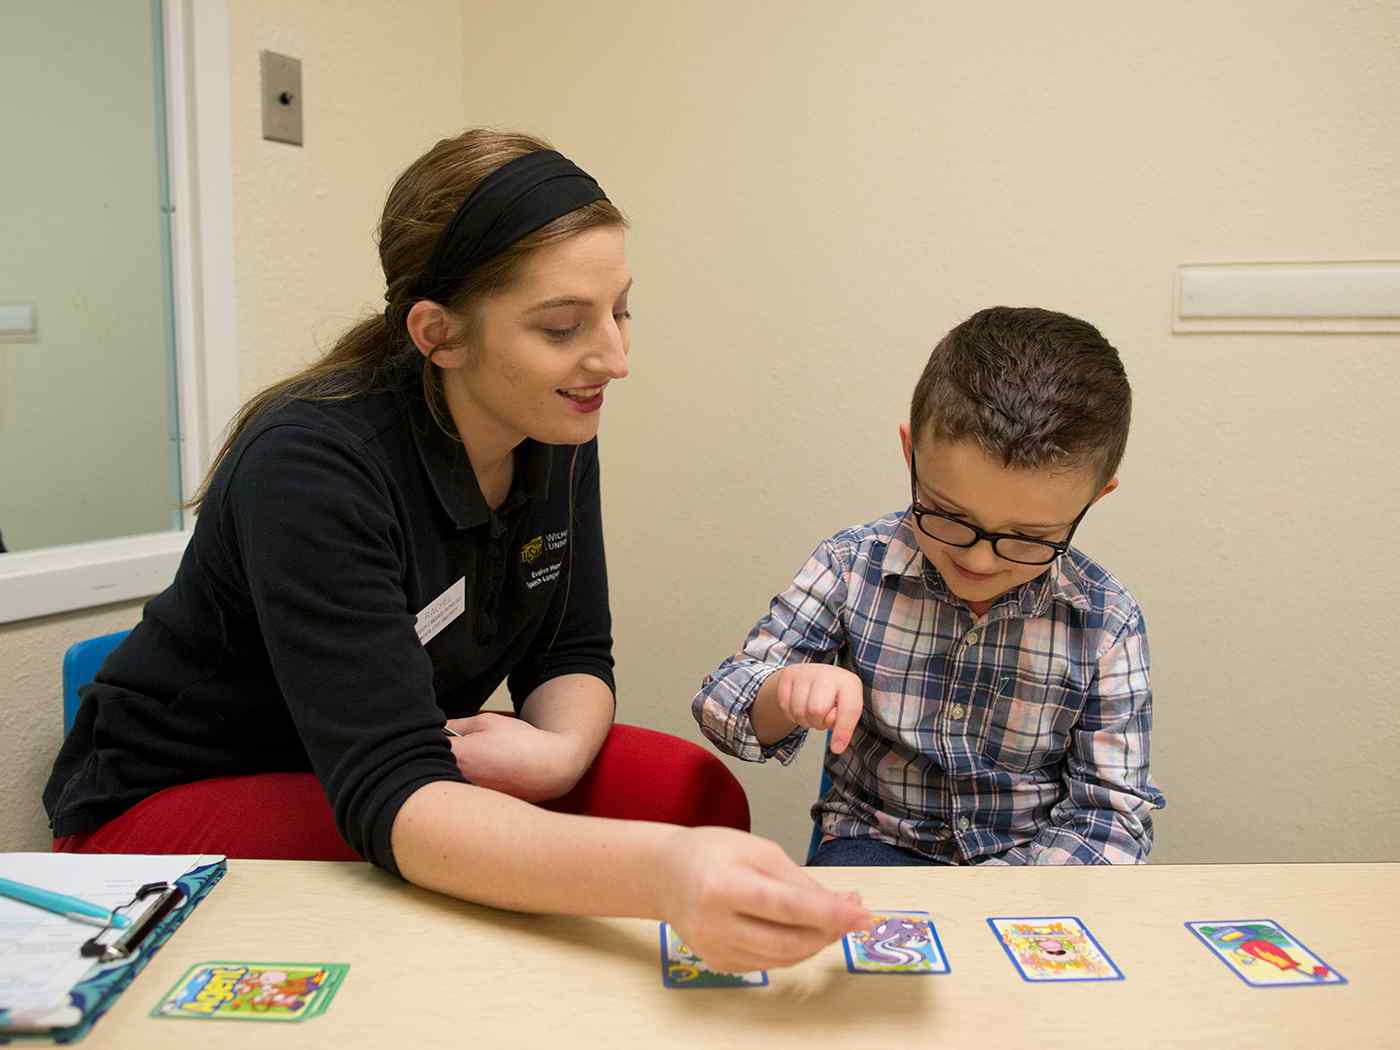 CSD student works with elementary aged child